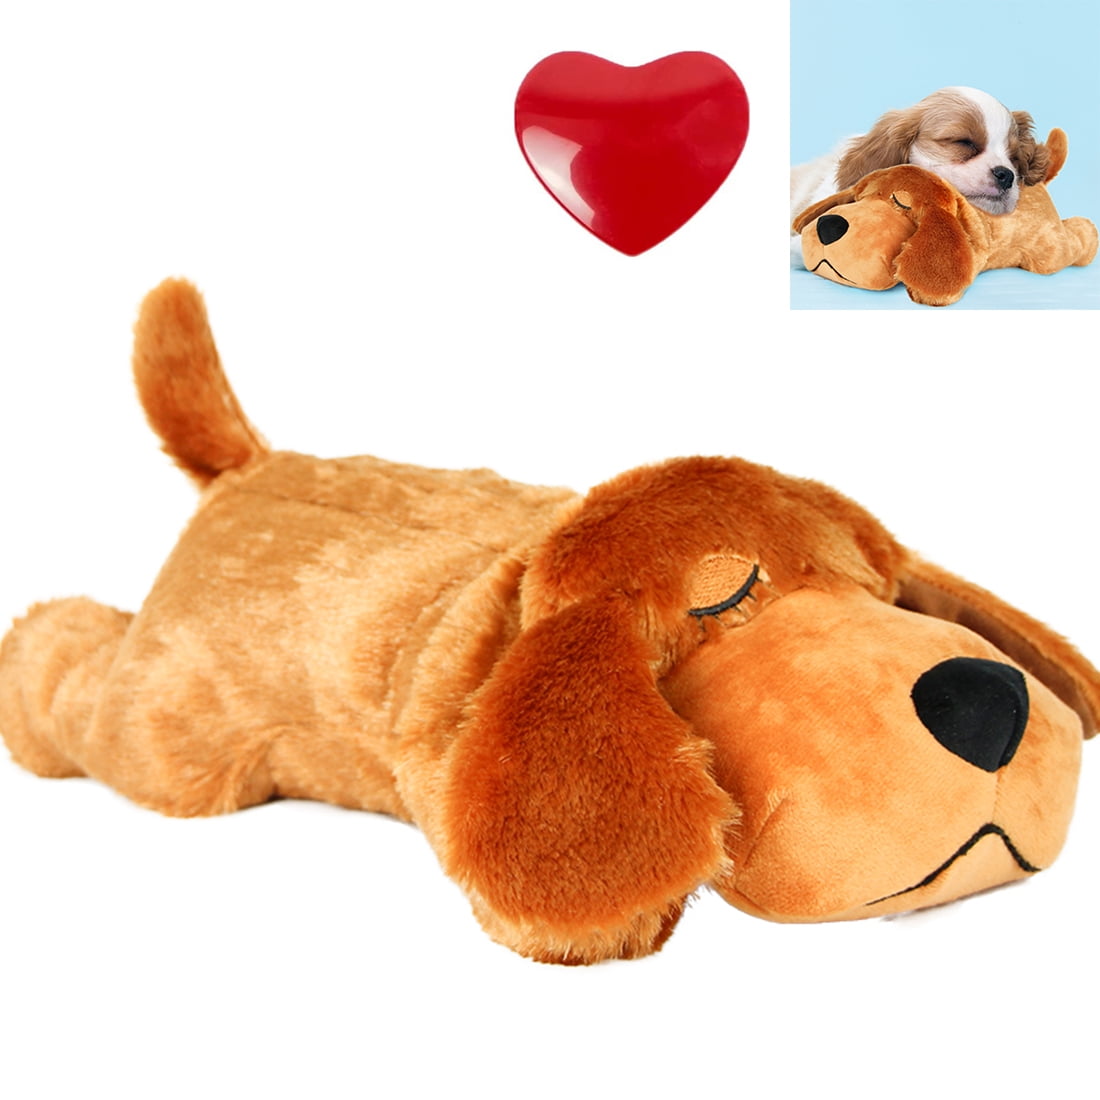 Original Snuggle Puppy Heartbeat Stuffed Toy for Dogs - Pet Anxiety Relief  and Calming Aid - Comfort Toy for Behavioral Training - Brown and White